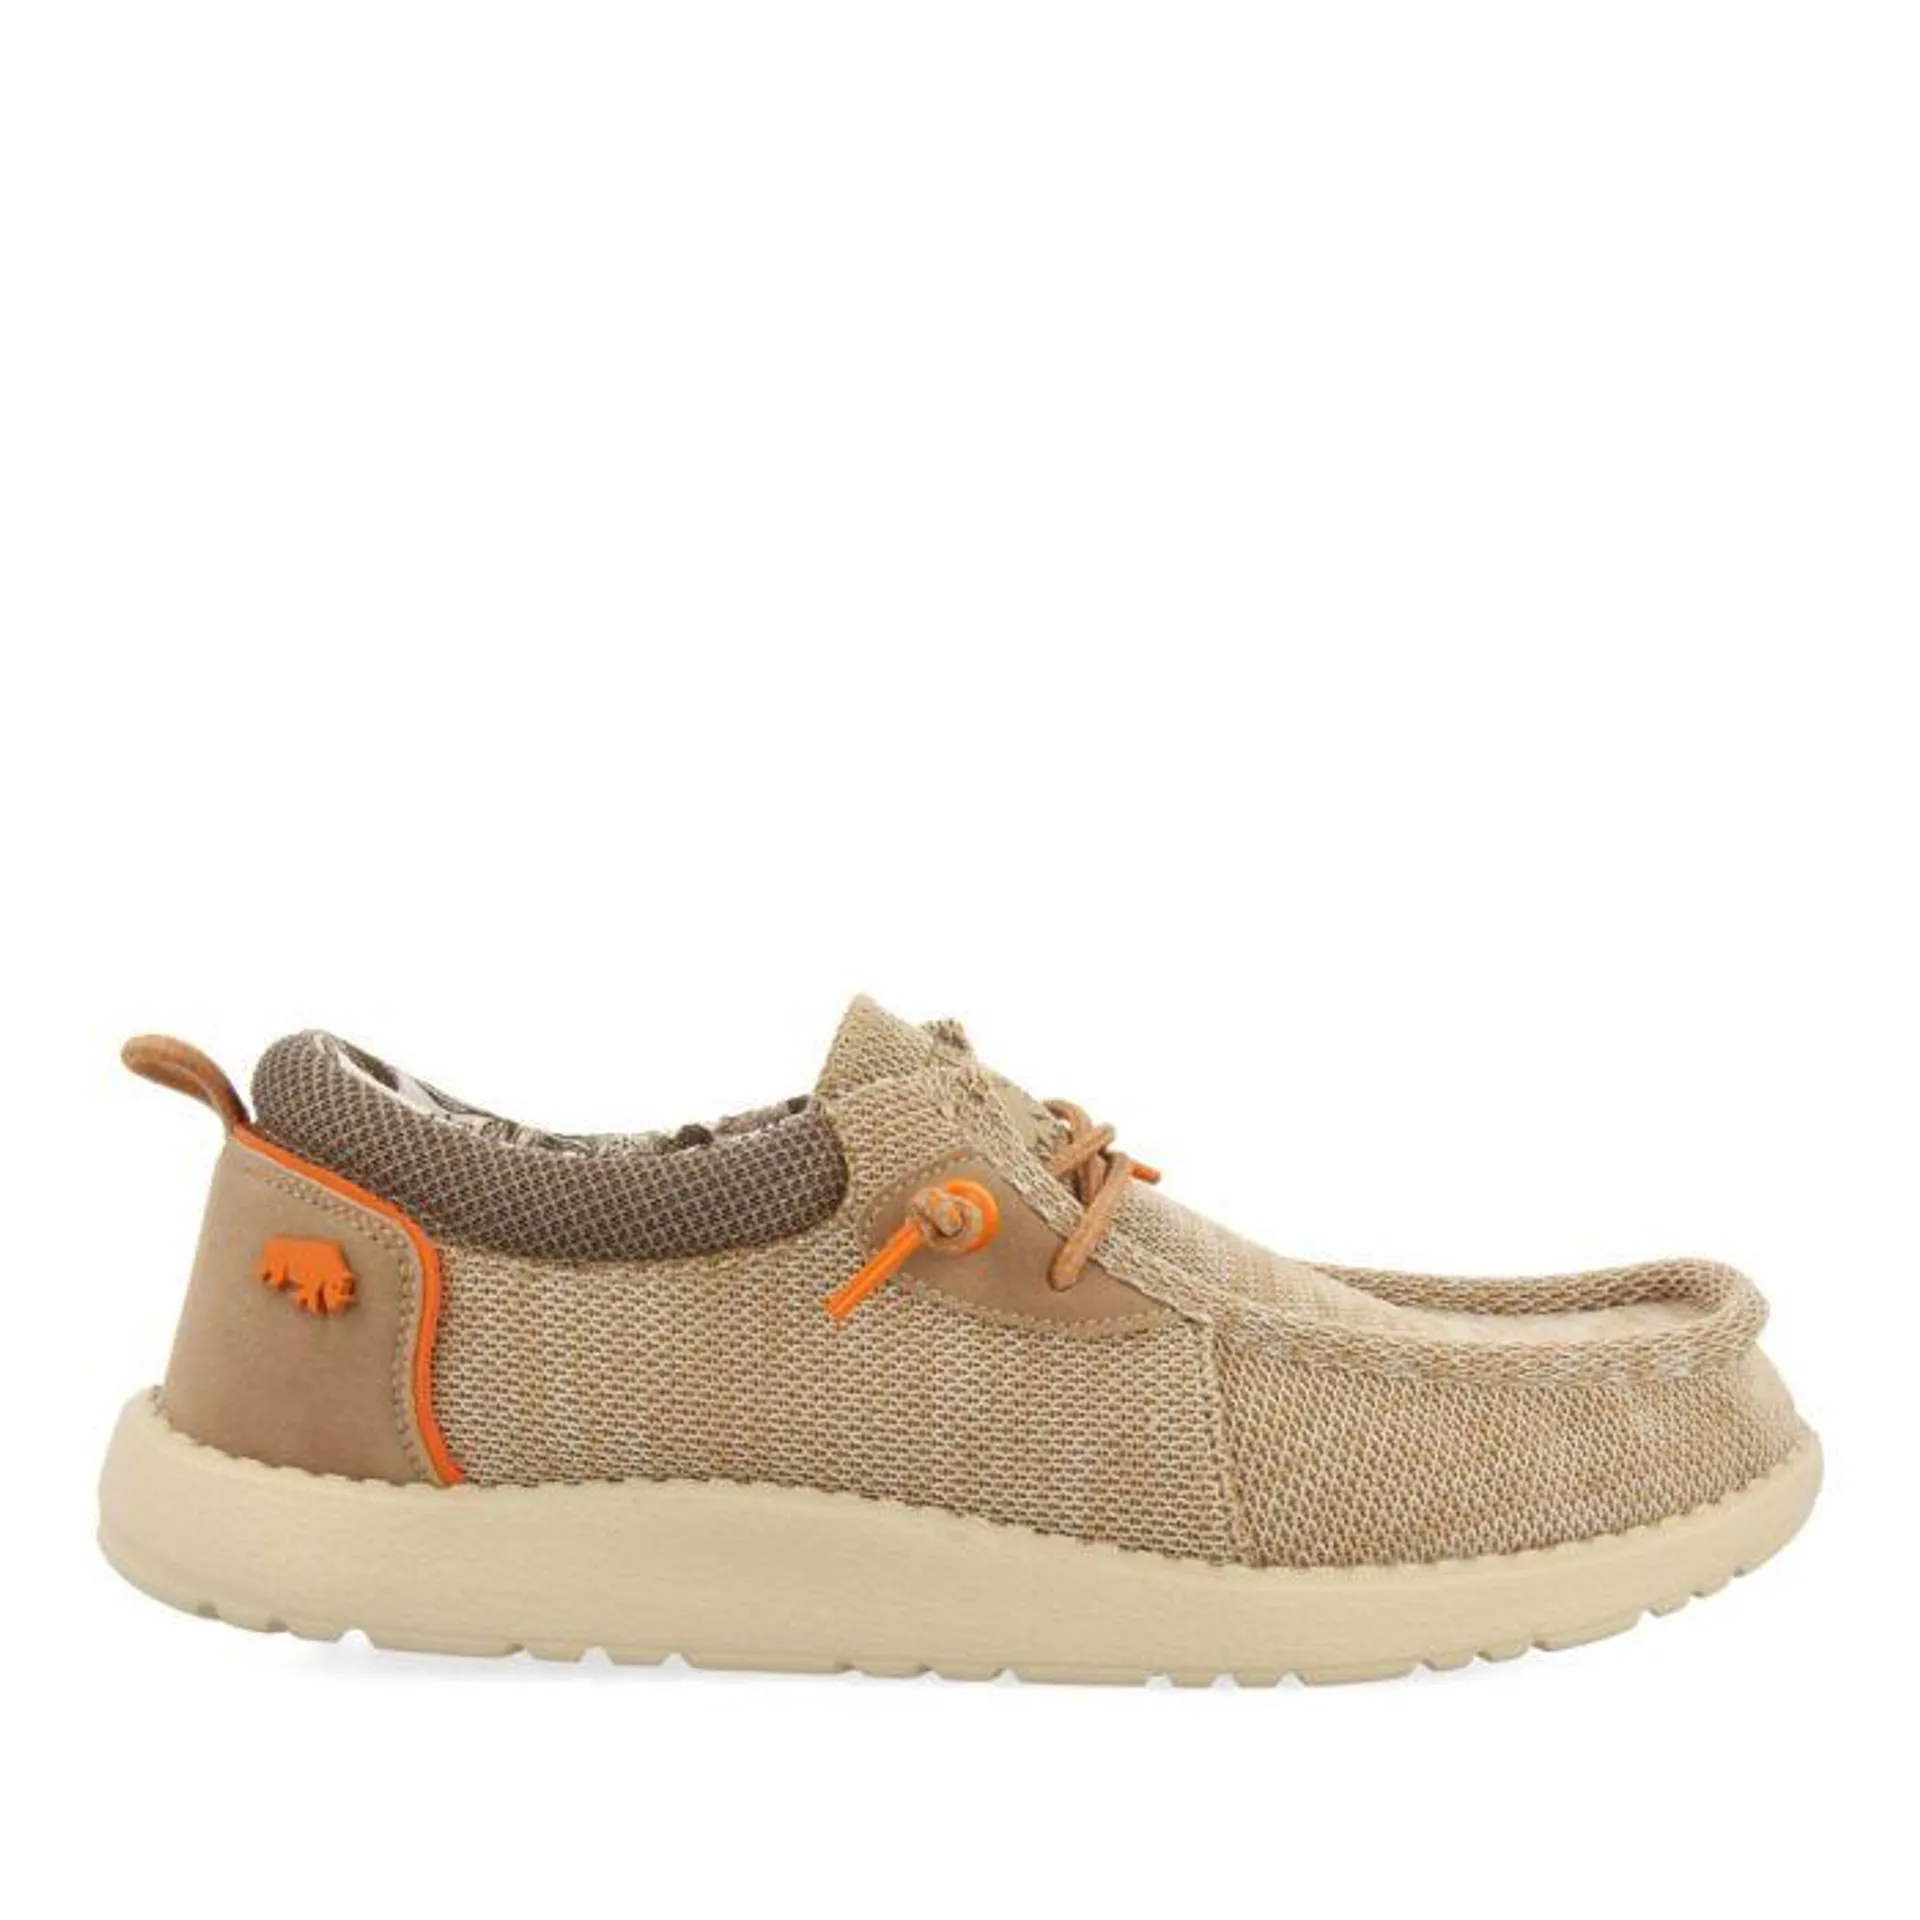 BEIGE WALLABEES STYLE MOCCASINS WITH ORANGE ACCENTS FOR MEN TREILLES